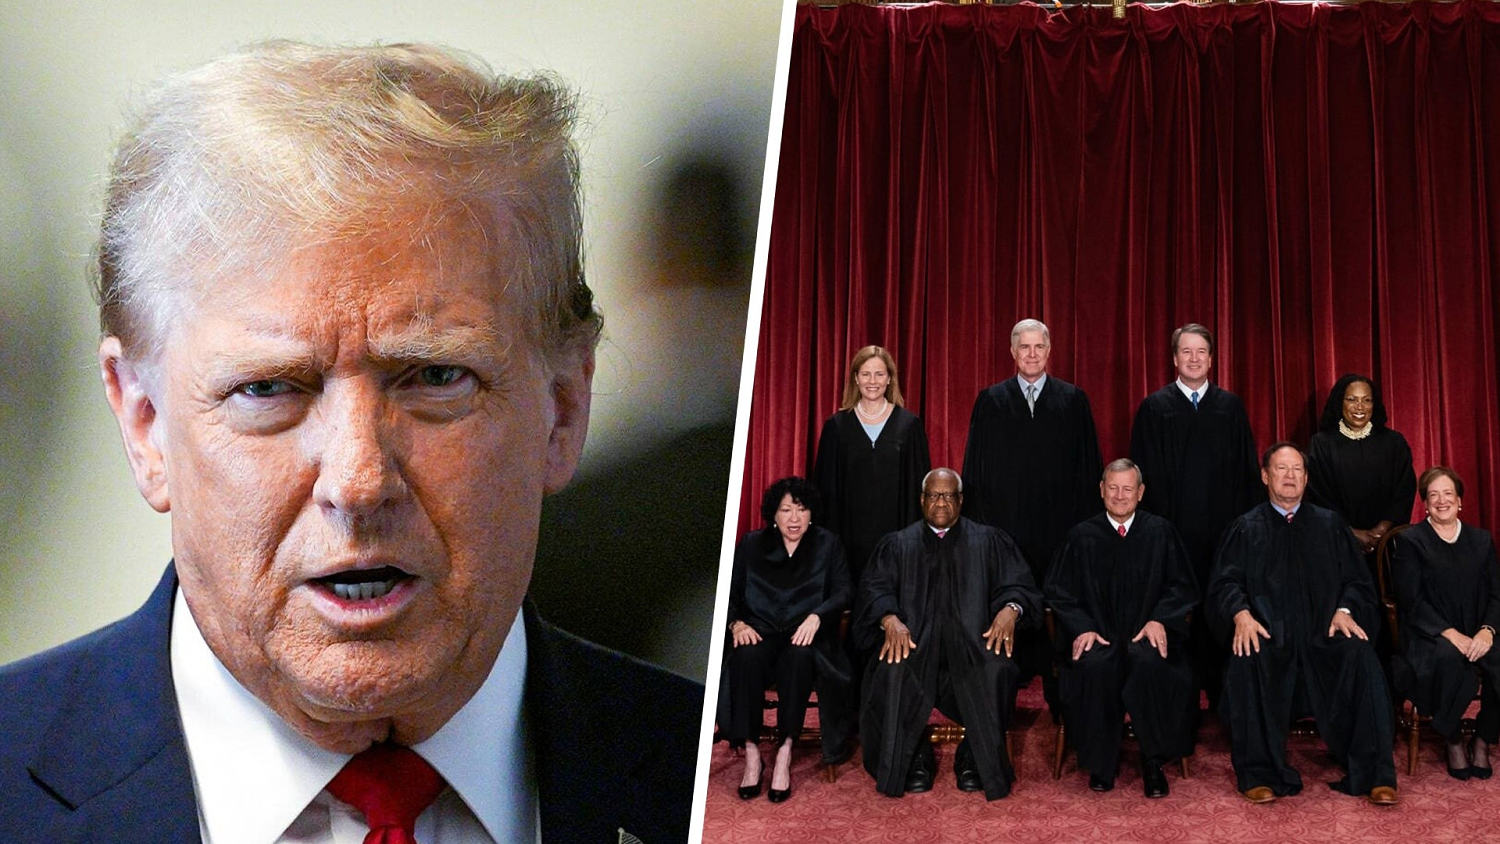 Official acts versus private? Justices weigh Trump's presidential
immunity claims